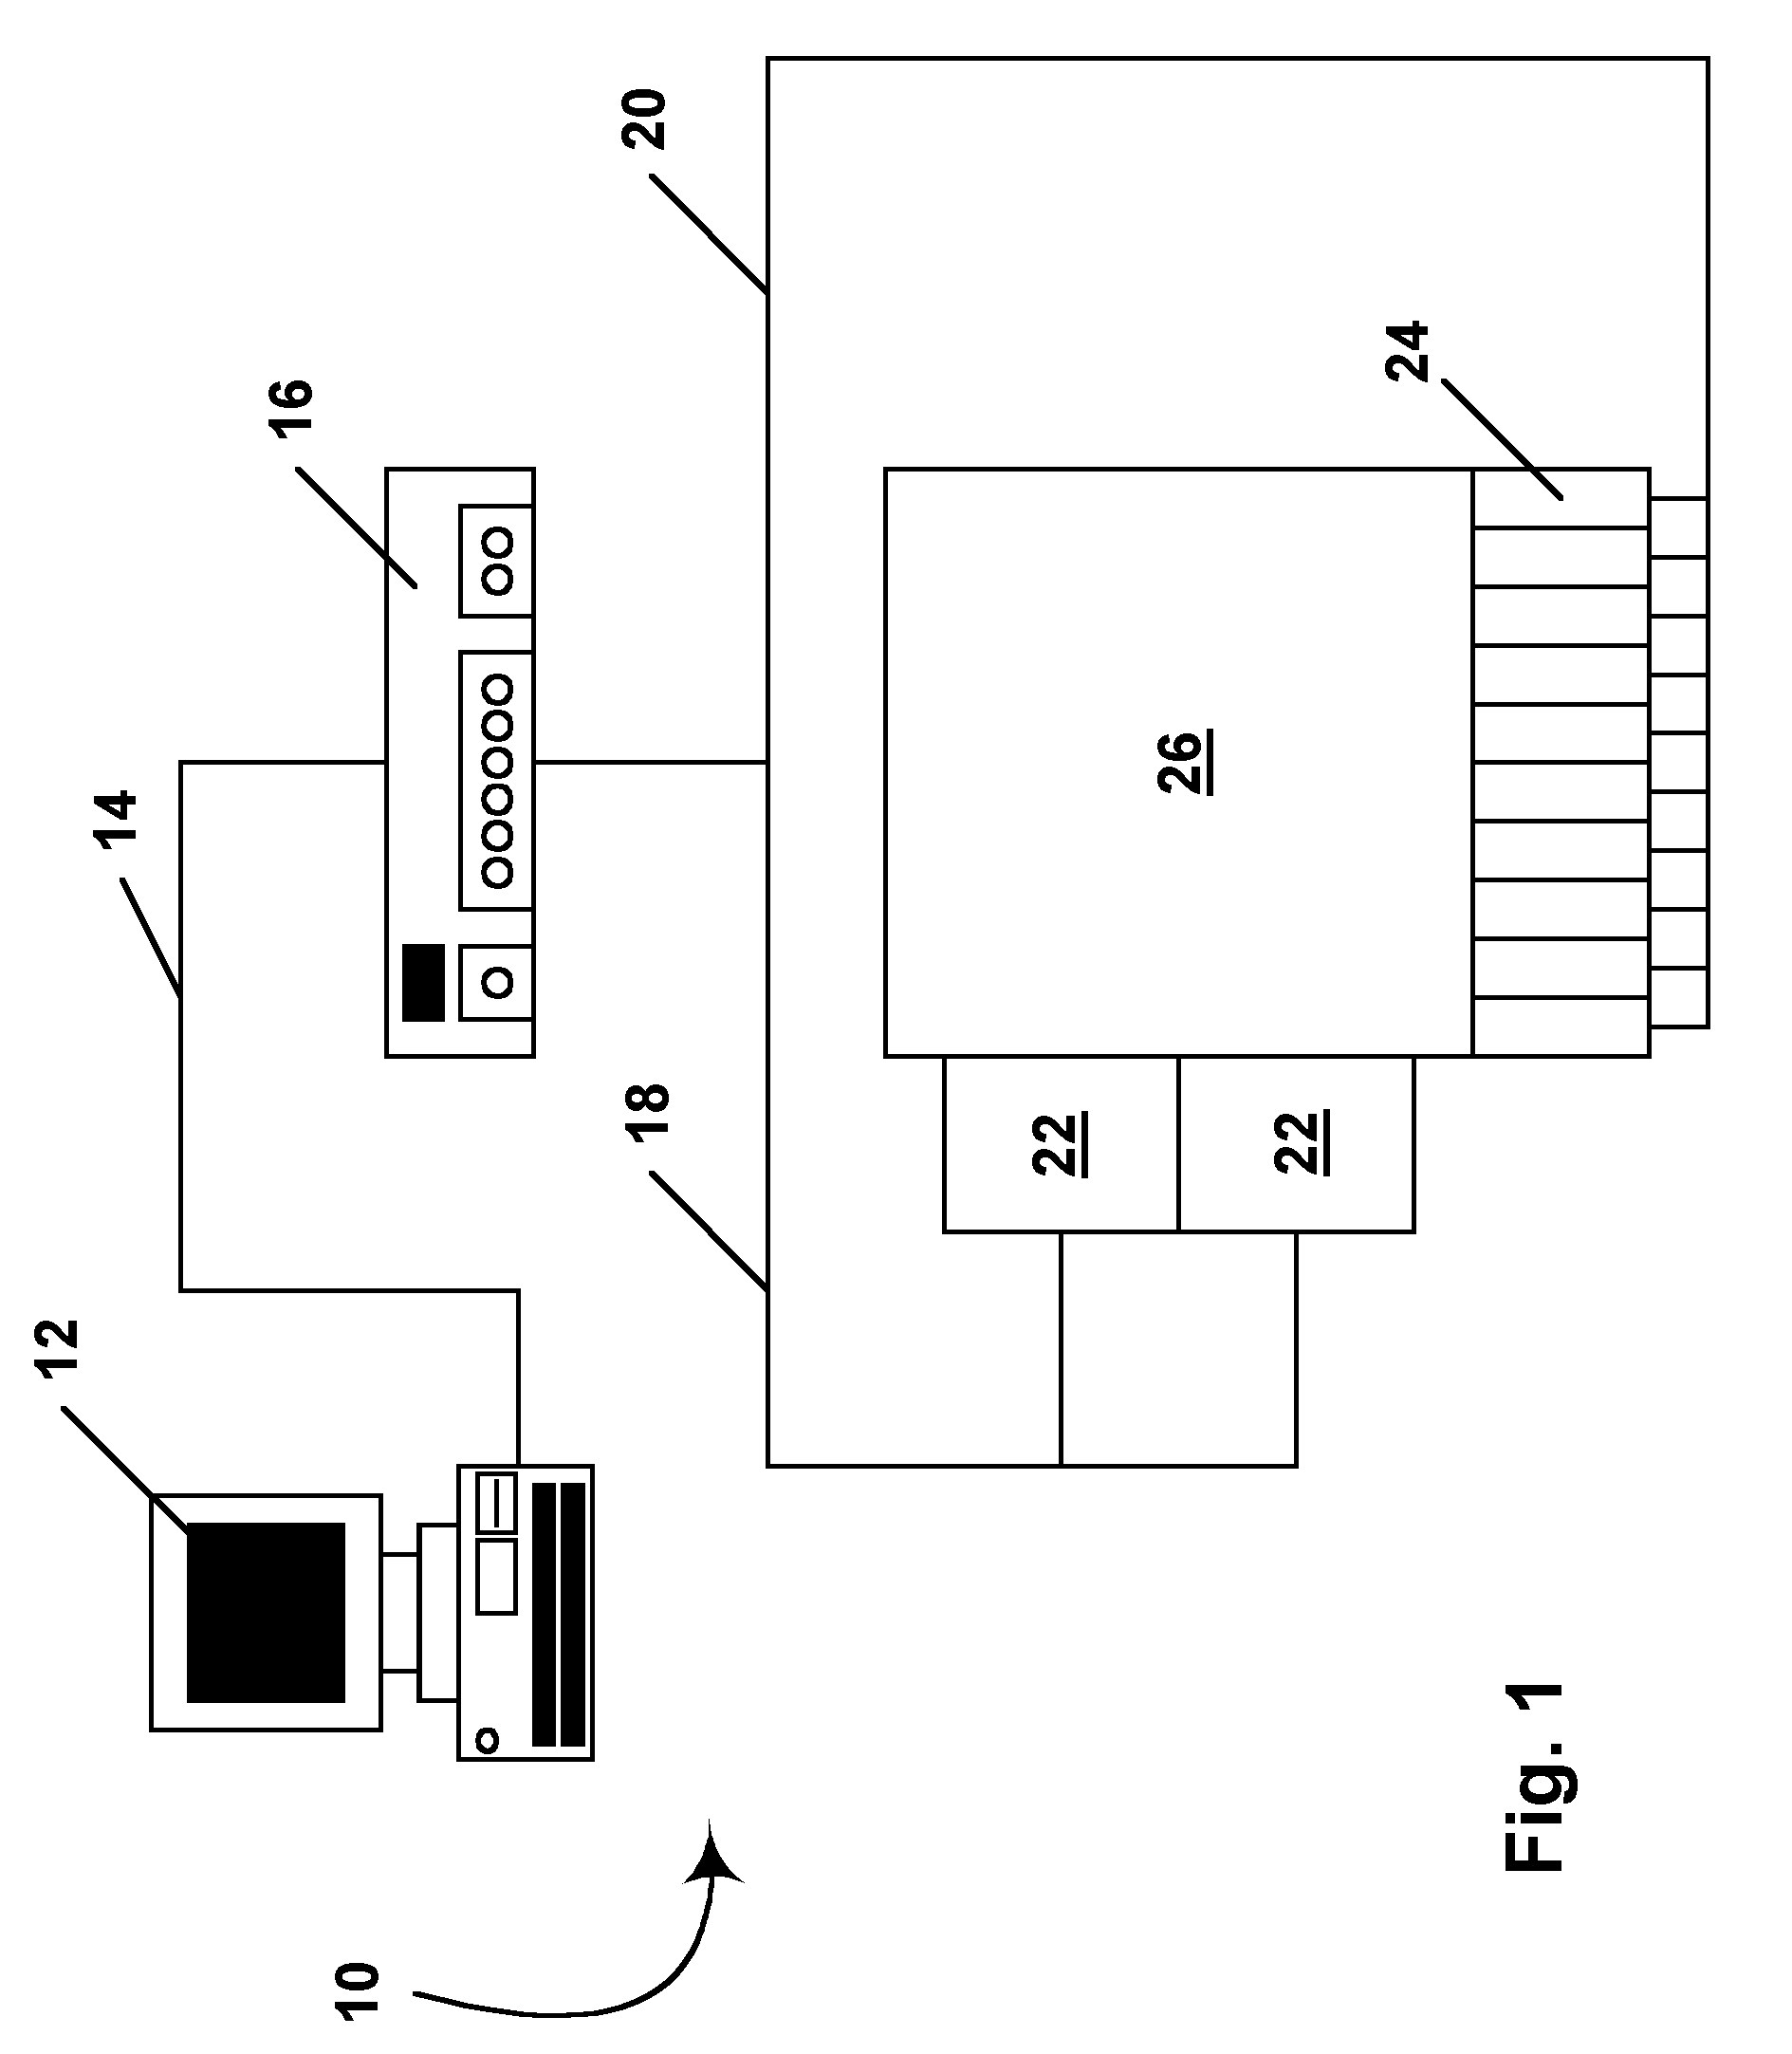 Methods for driving electro-optic displays, and apparatus for use therein